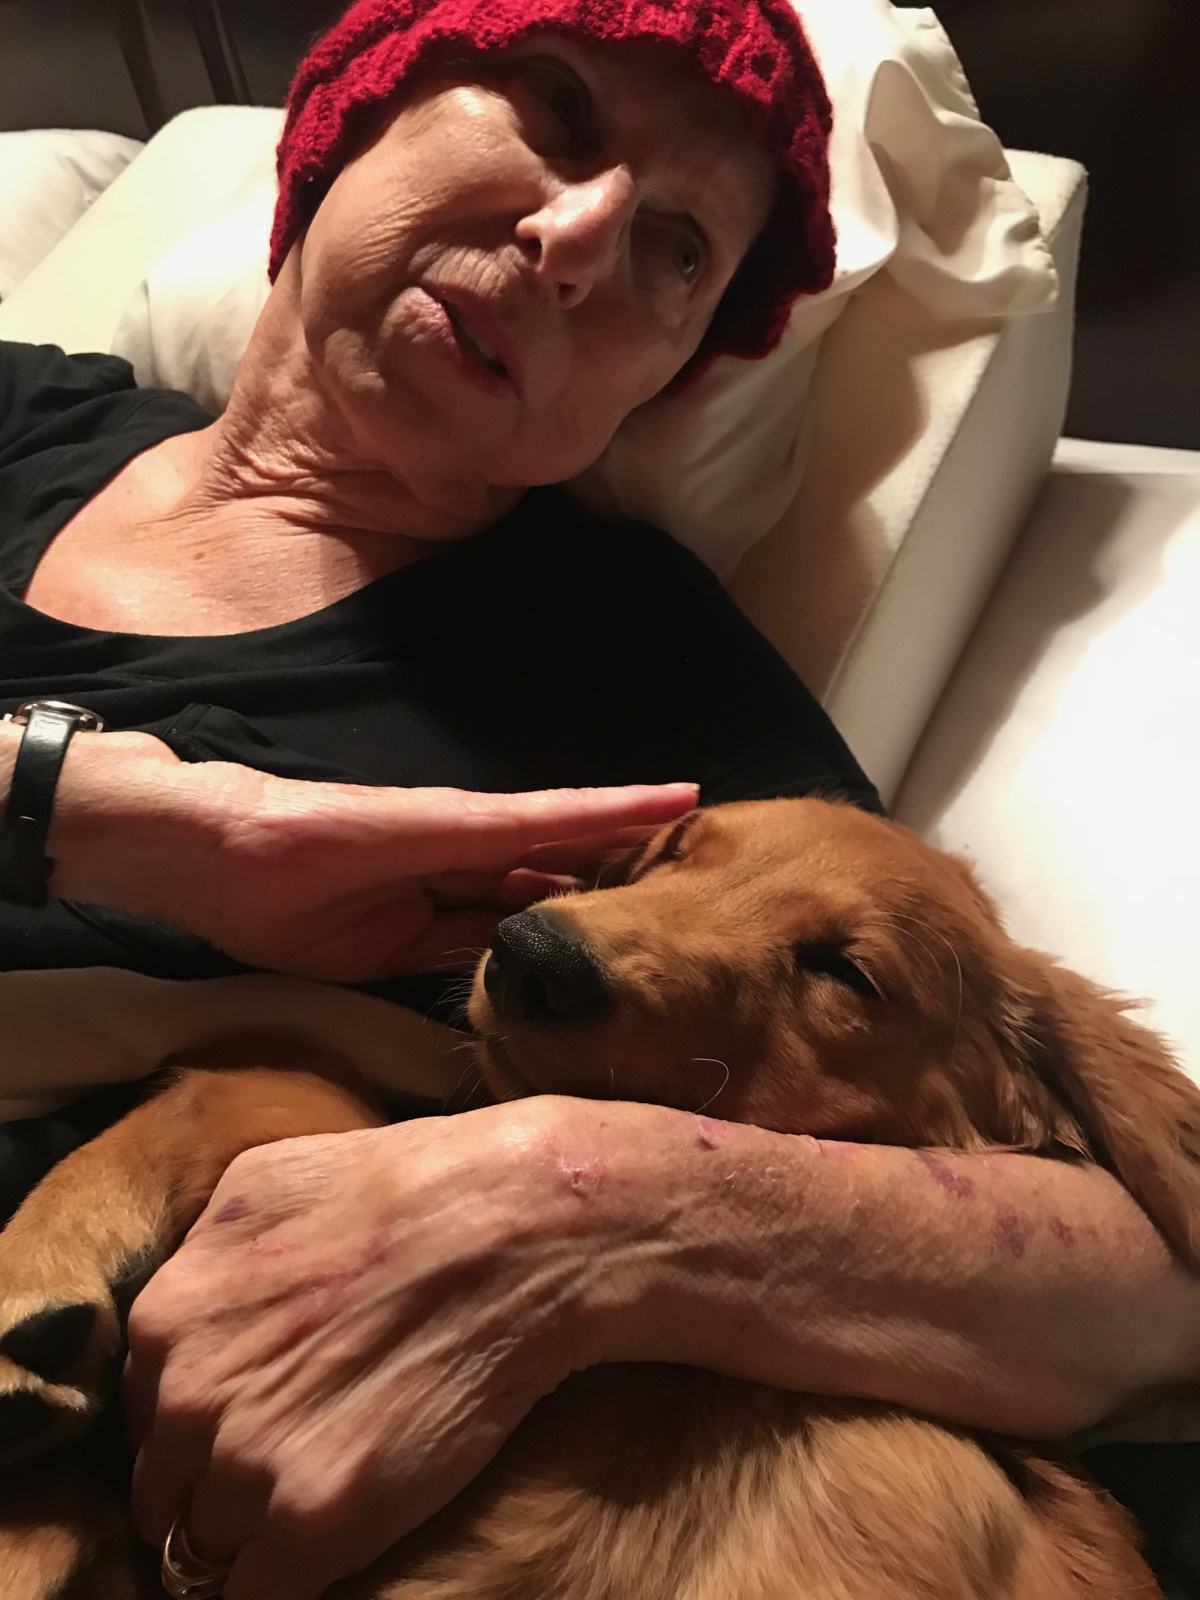 Redgie says good night to mom every night and gets snuggles.